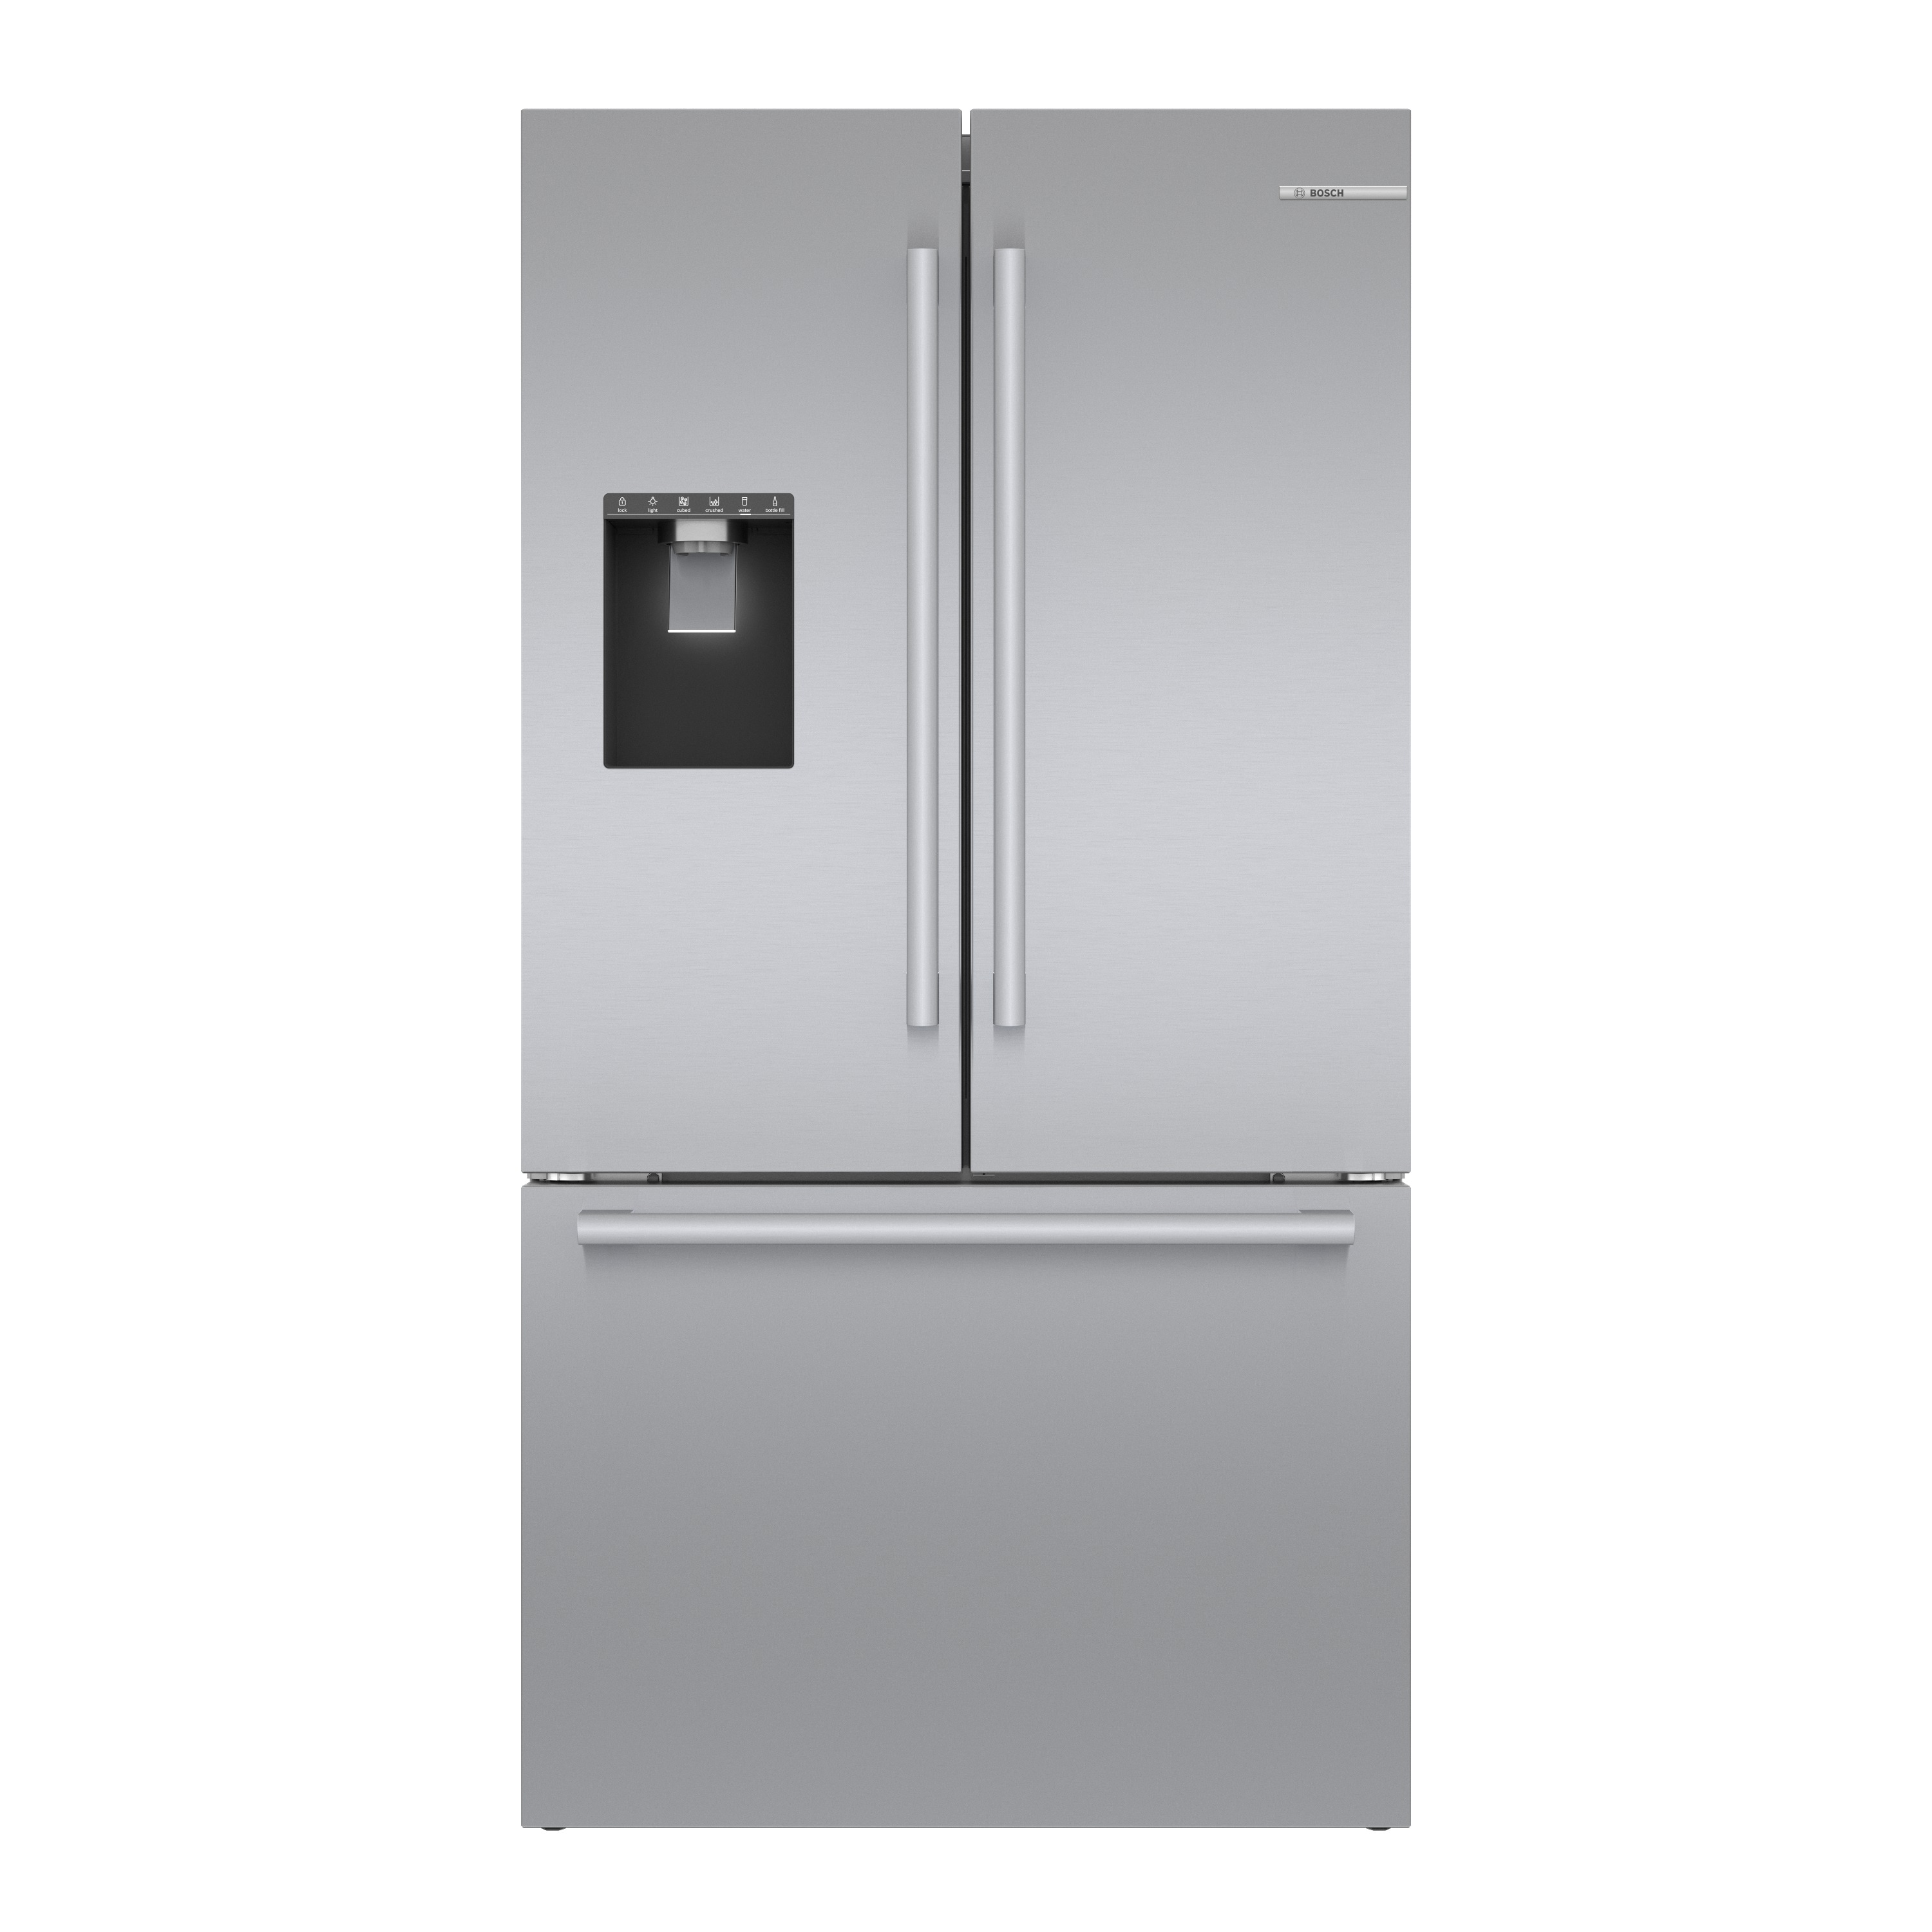 Door Door French ENERGY the Series (Stainless ft at Ice Smart 26-cu STAR 500 department Bosch French Steel) Maker with Refrigerator Refrigerators in